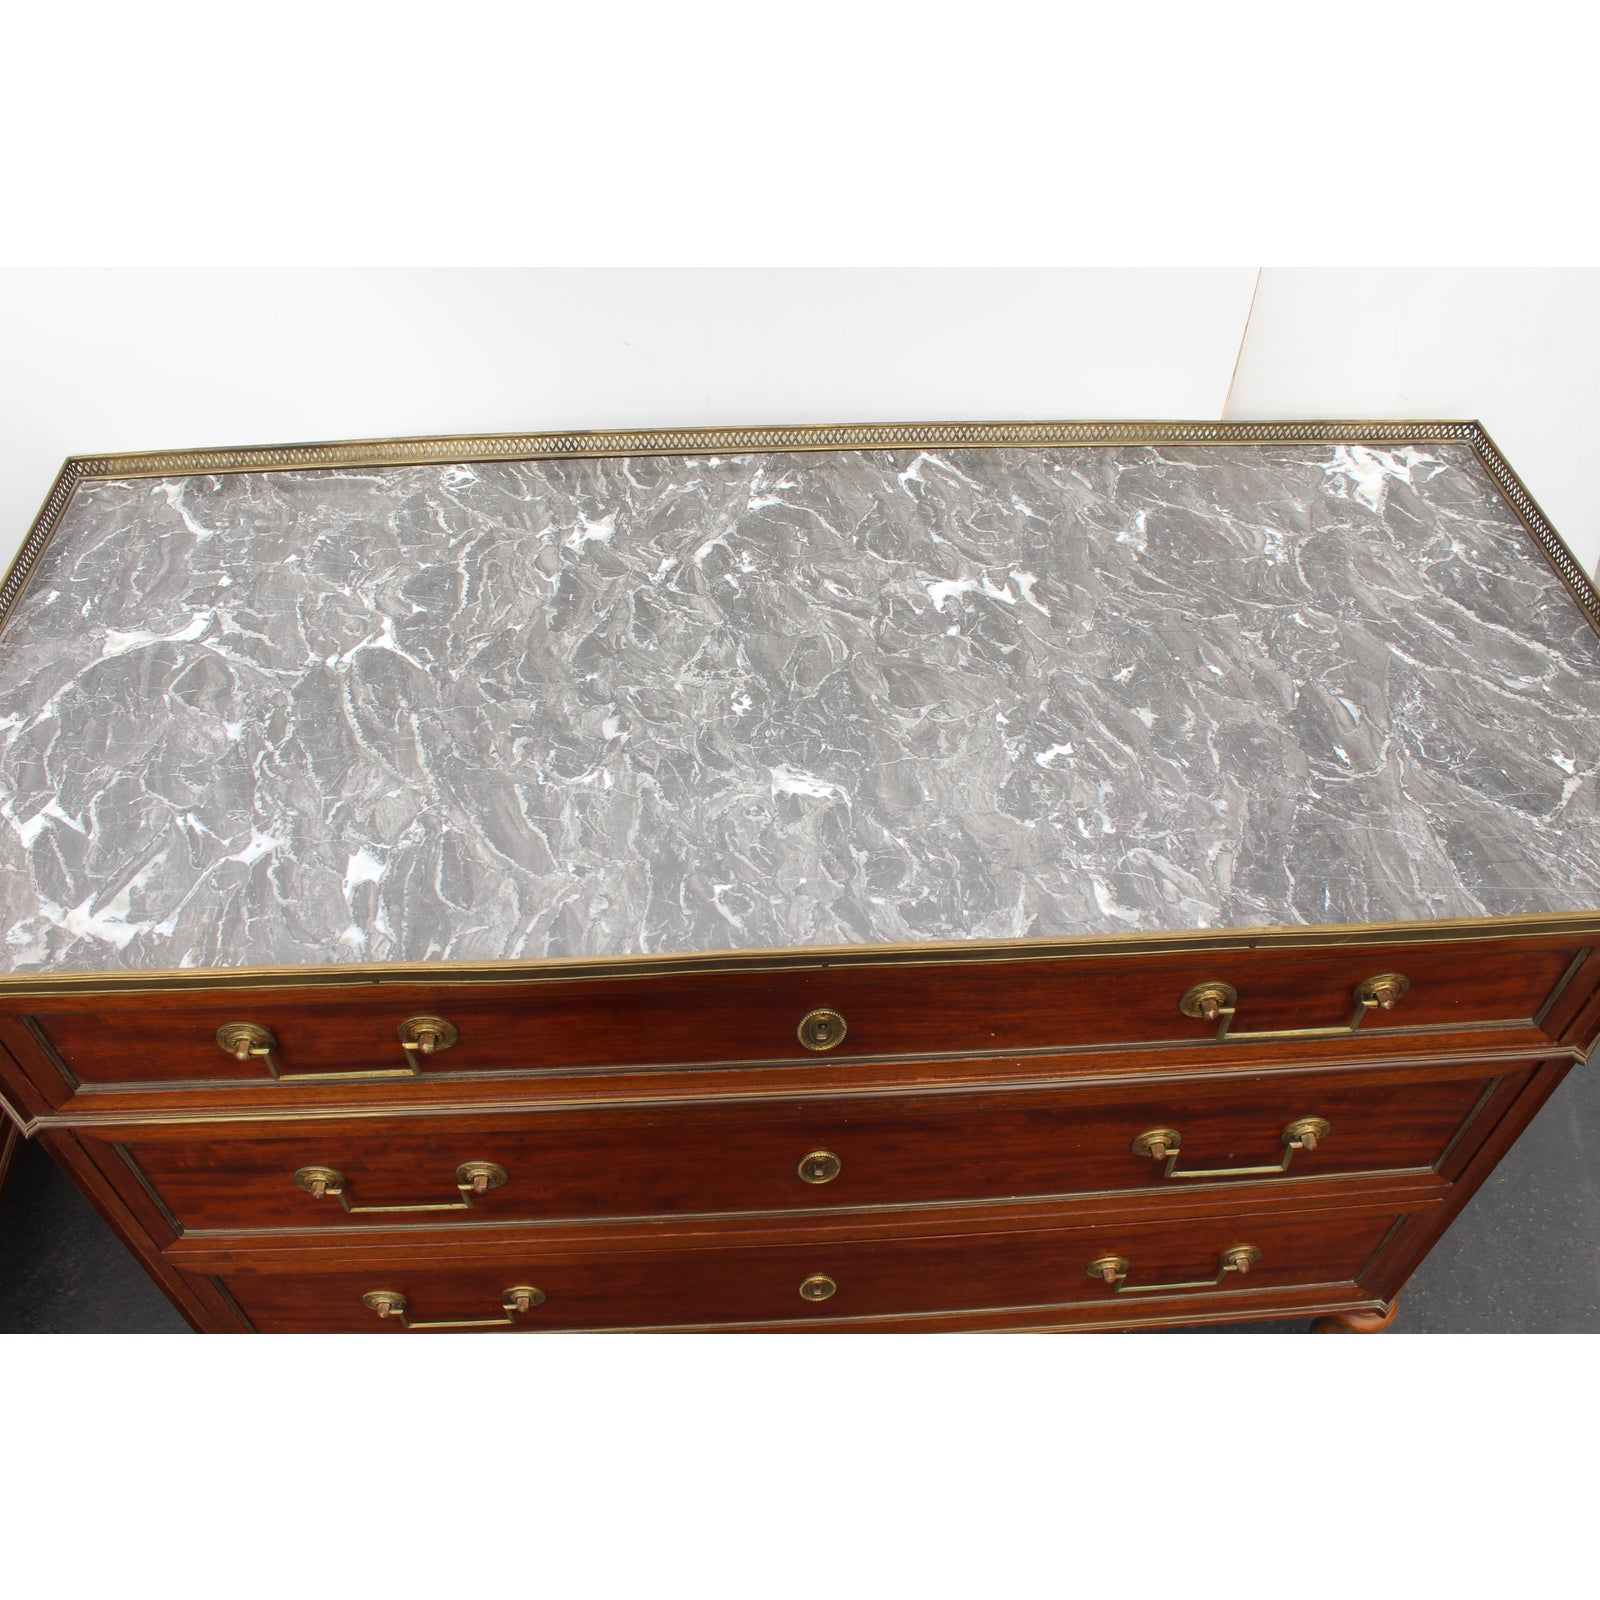 early-20th-centurydirectoire-style-french-chest-of-drawers-with-marble-tops-a-pair-8715